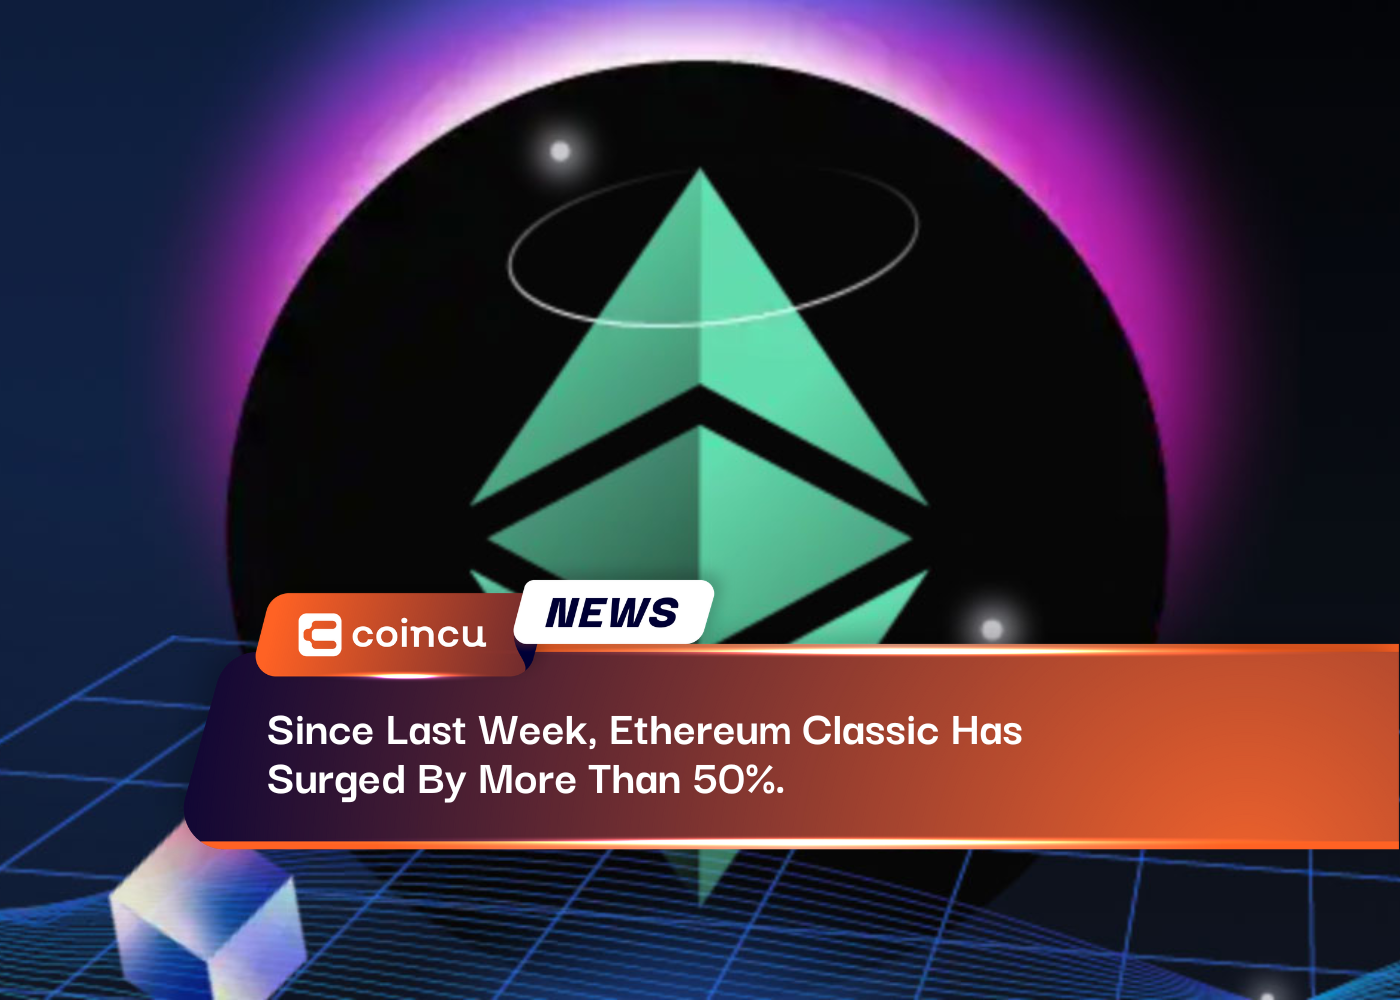 Since Last Week, Ethereum Classic Has Surged By More Than 50%.